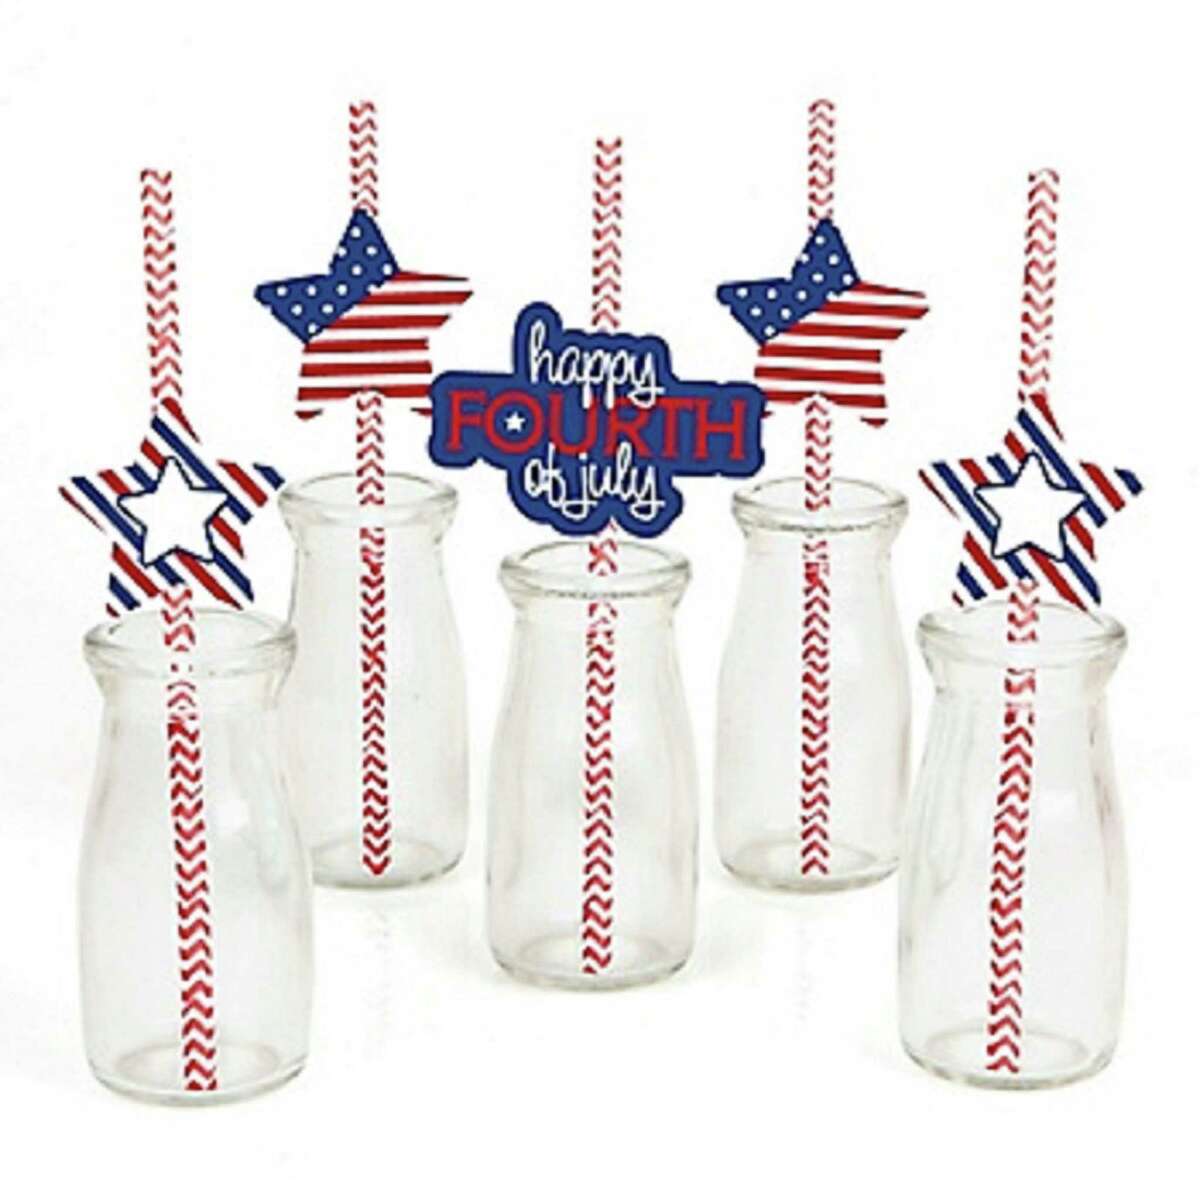 Decorative straws: Kids, and adults who act like them, will love drinking punch or other beverages with these festive stars-and-stripes themed party straws. The DIY kit comes with stickers, paper cutouts and straws, and you can use them for straws or as cupcake decorations. $16.90 (set of 25); jet.com